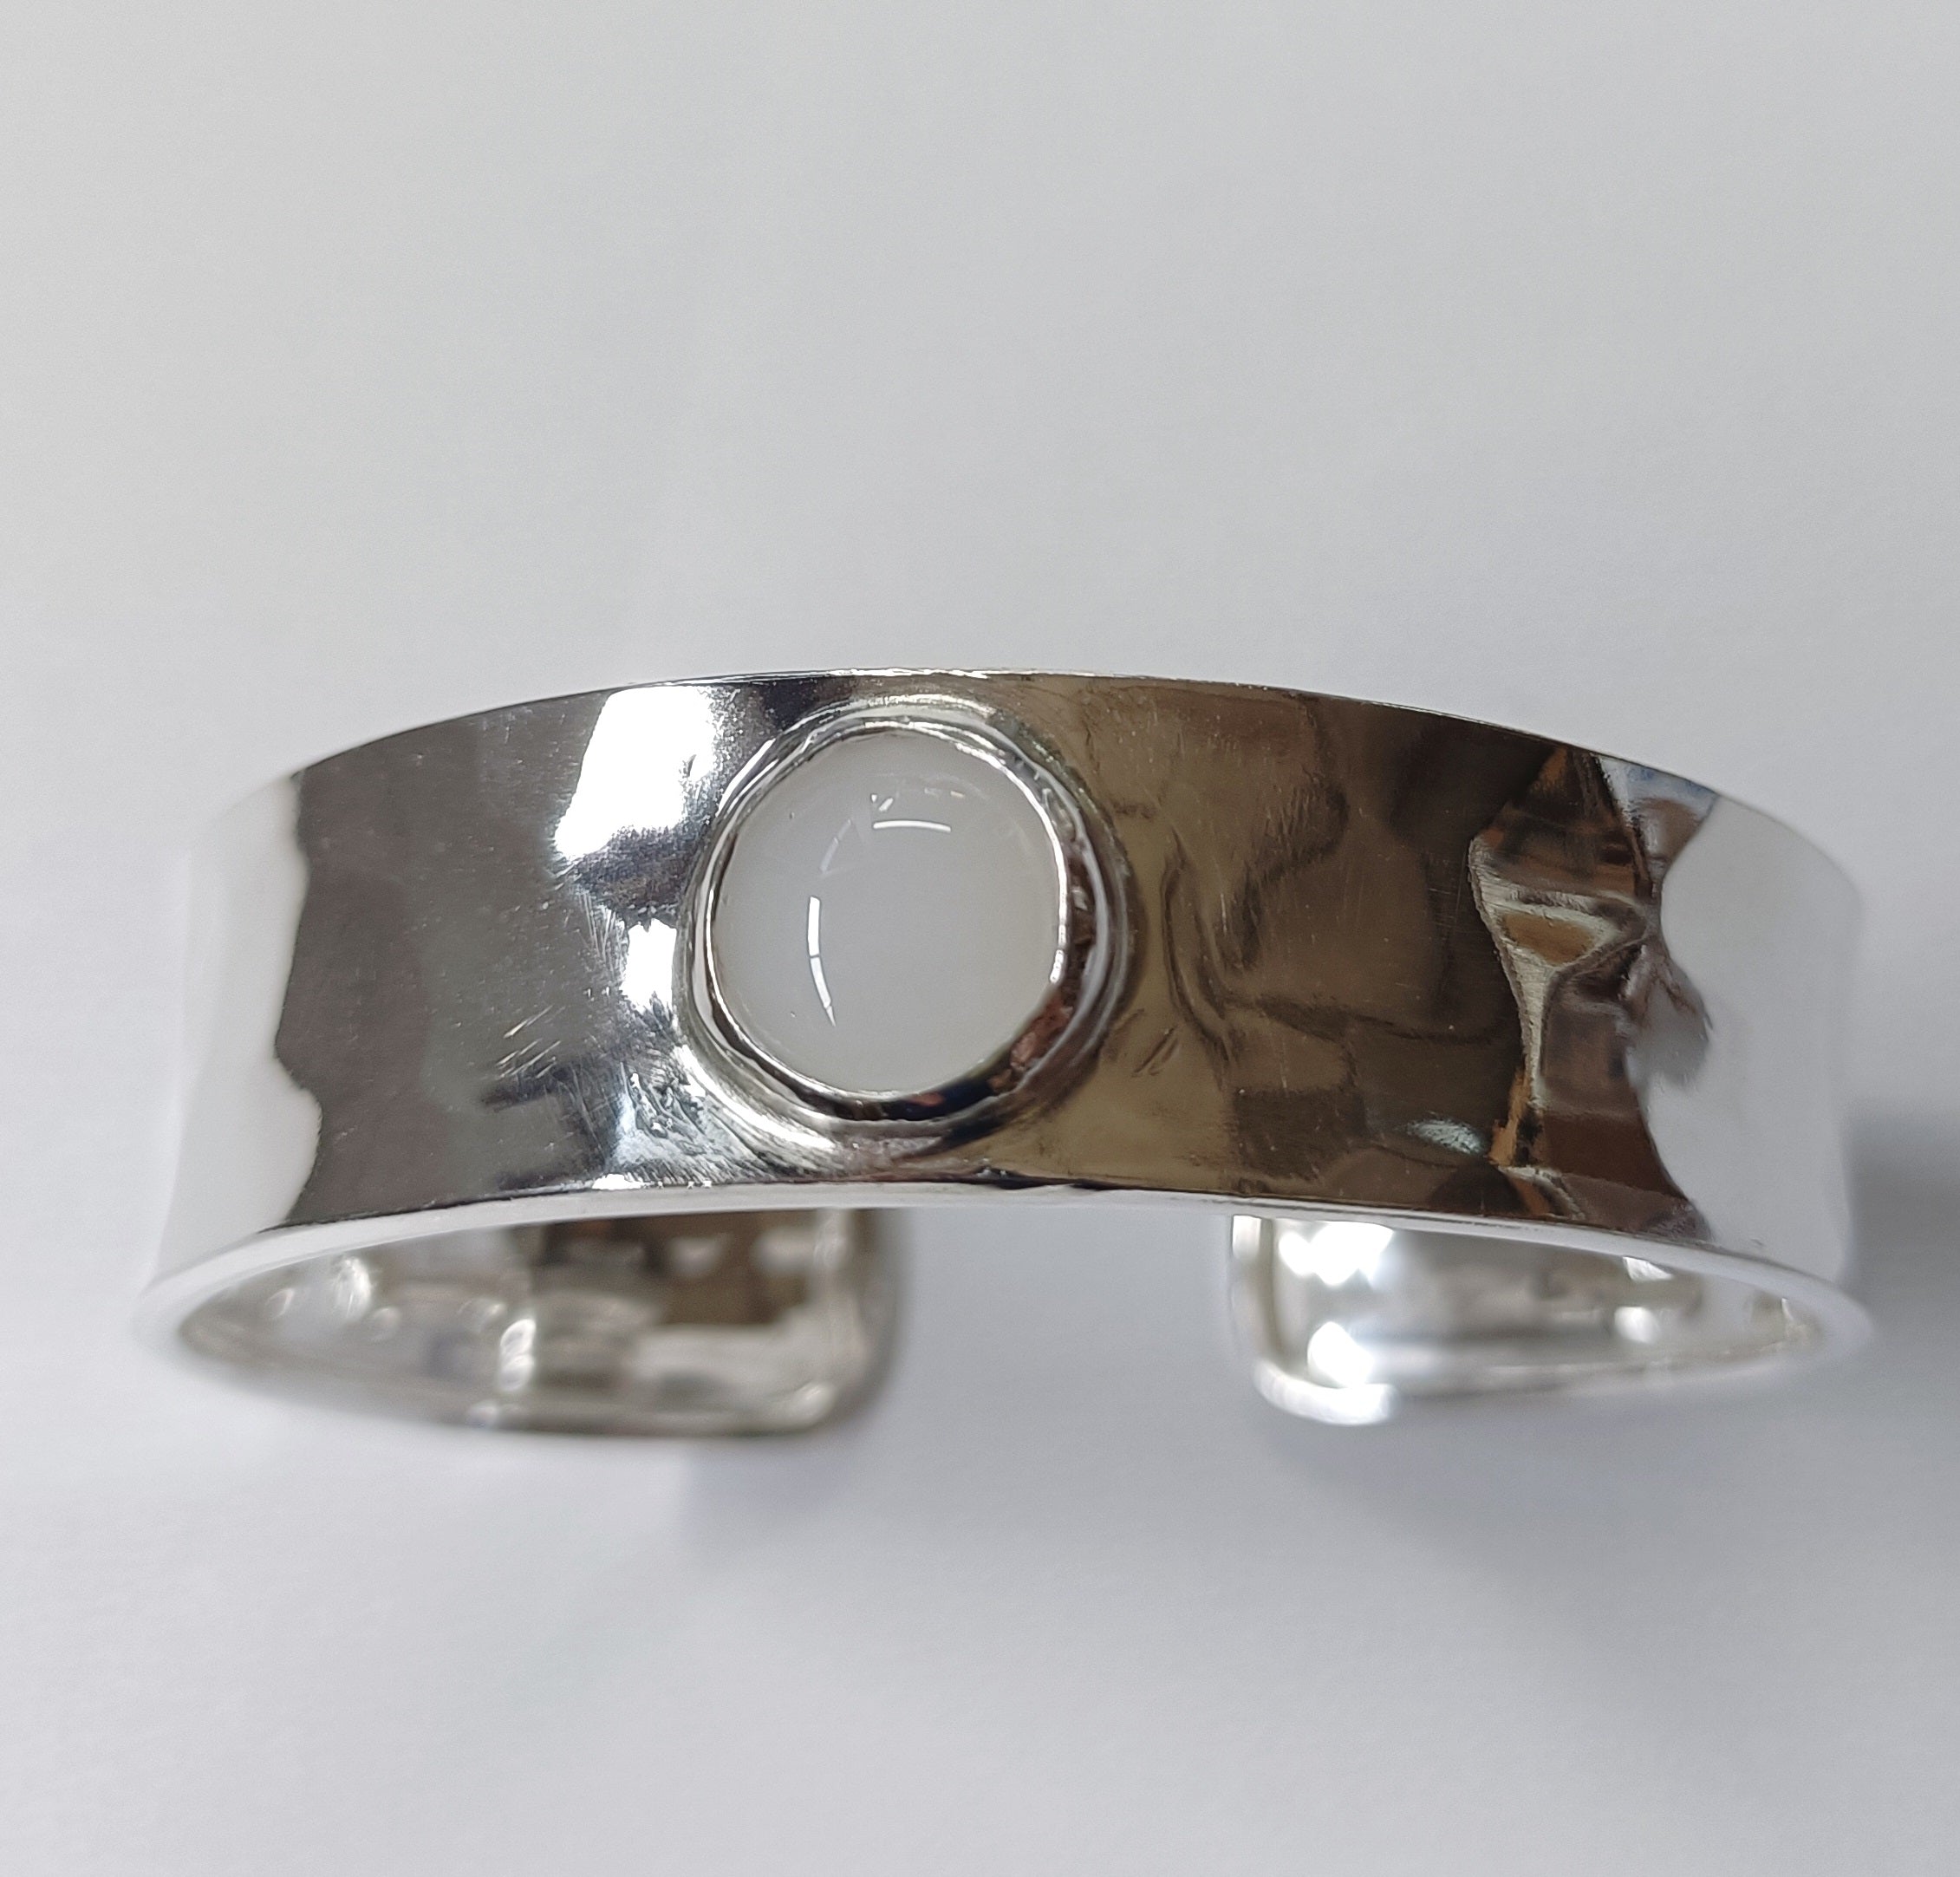 Olimpia 15, small rigid band bracelets in glass and silver